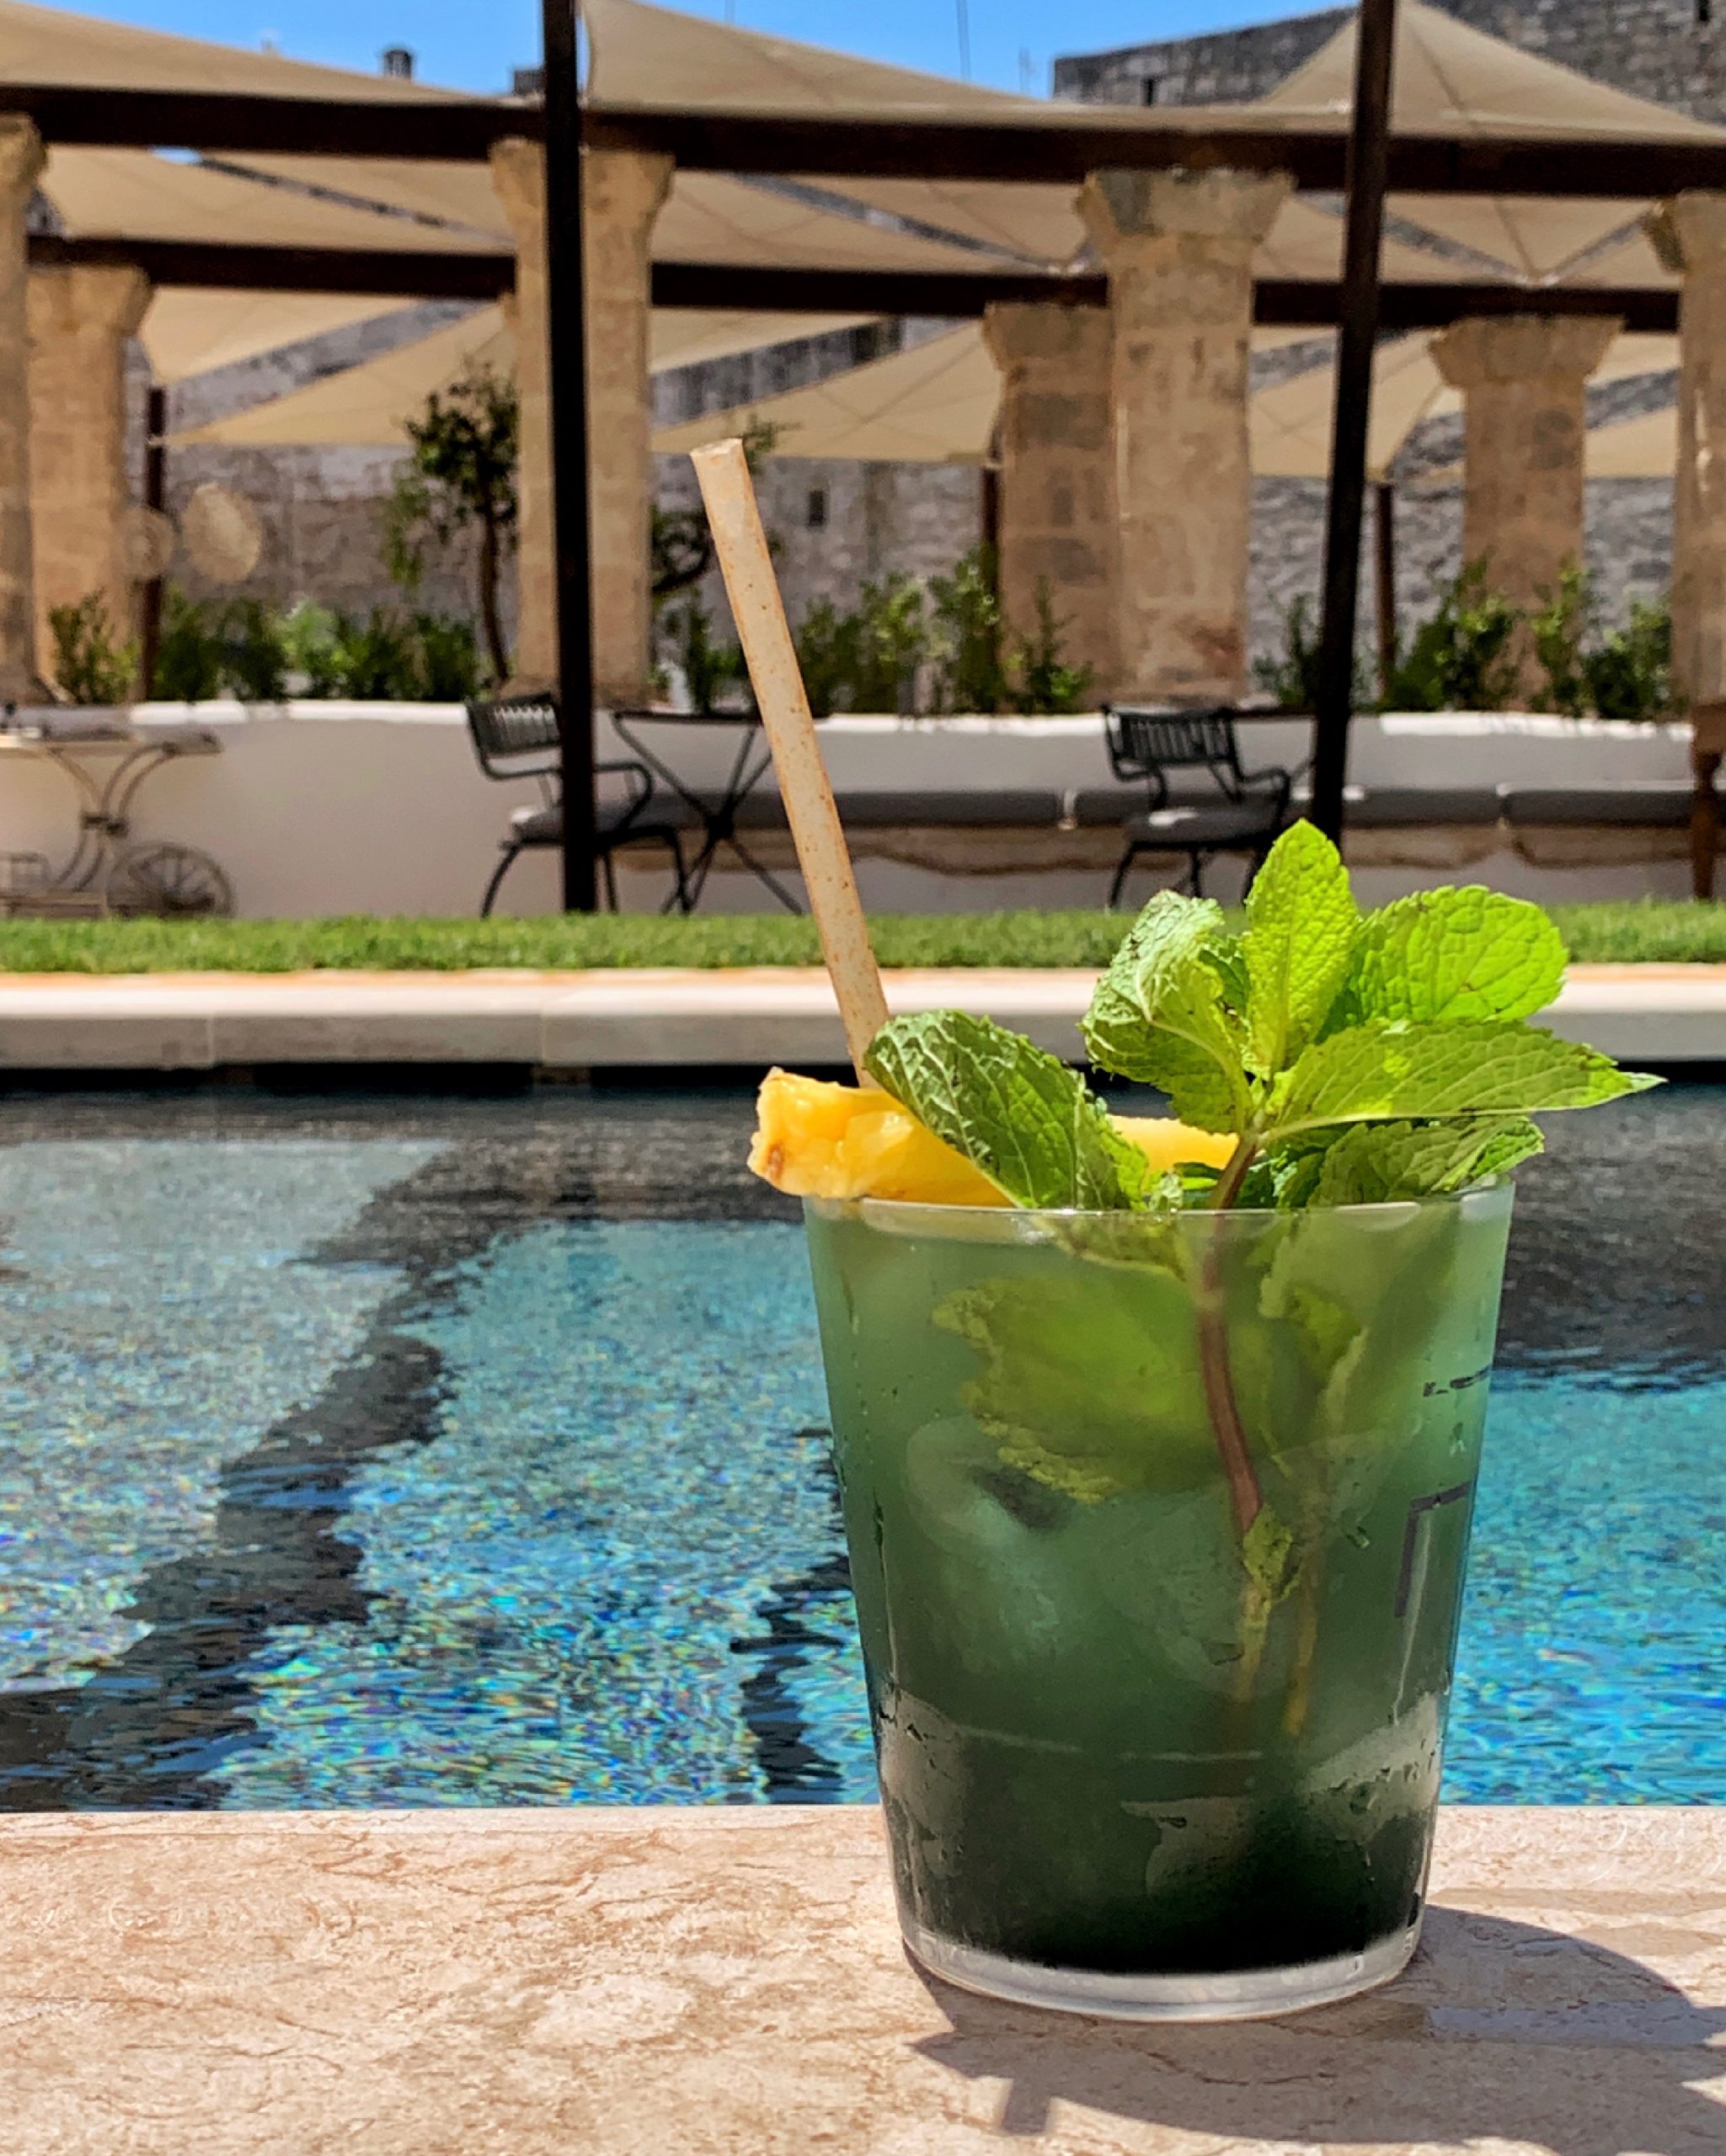 Relax in style the best gay and gay friendly accommodation in Puglia, Paragon 700 Ostuni | Photo The Big Gay Podcast from Puglia | Sunday Brunch at Restaurant 700, Ostuni